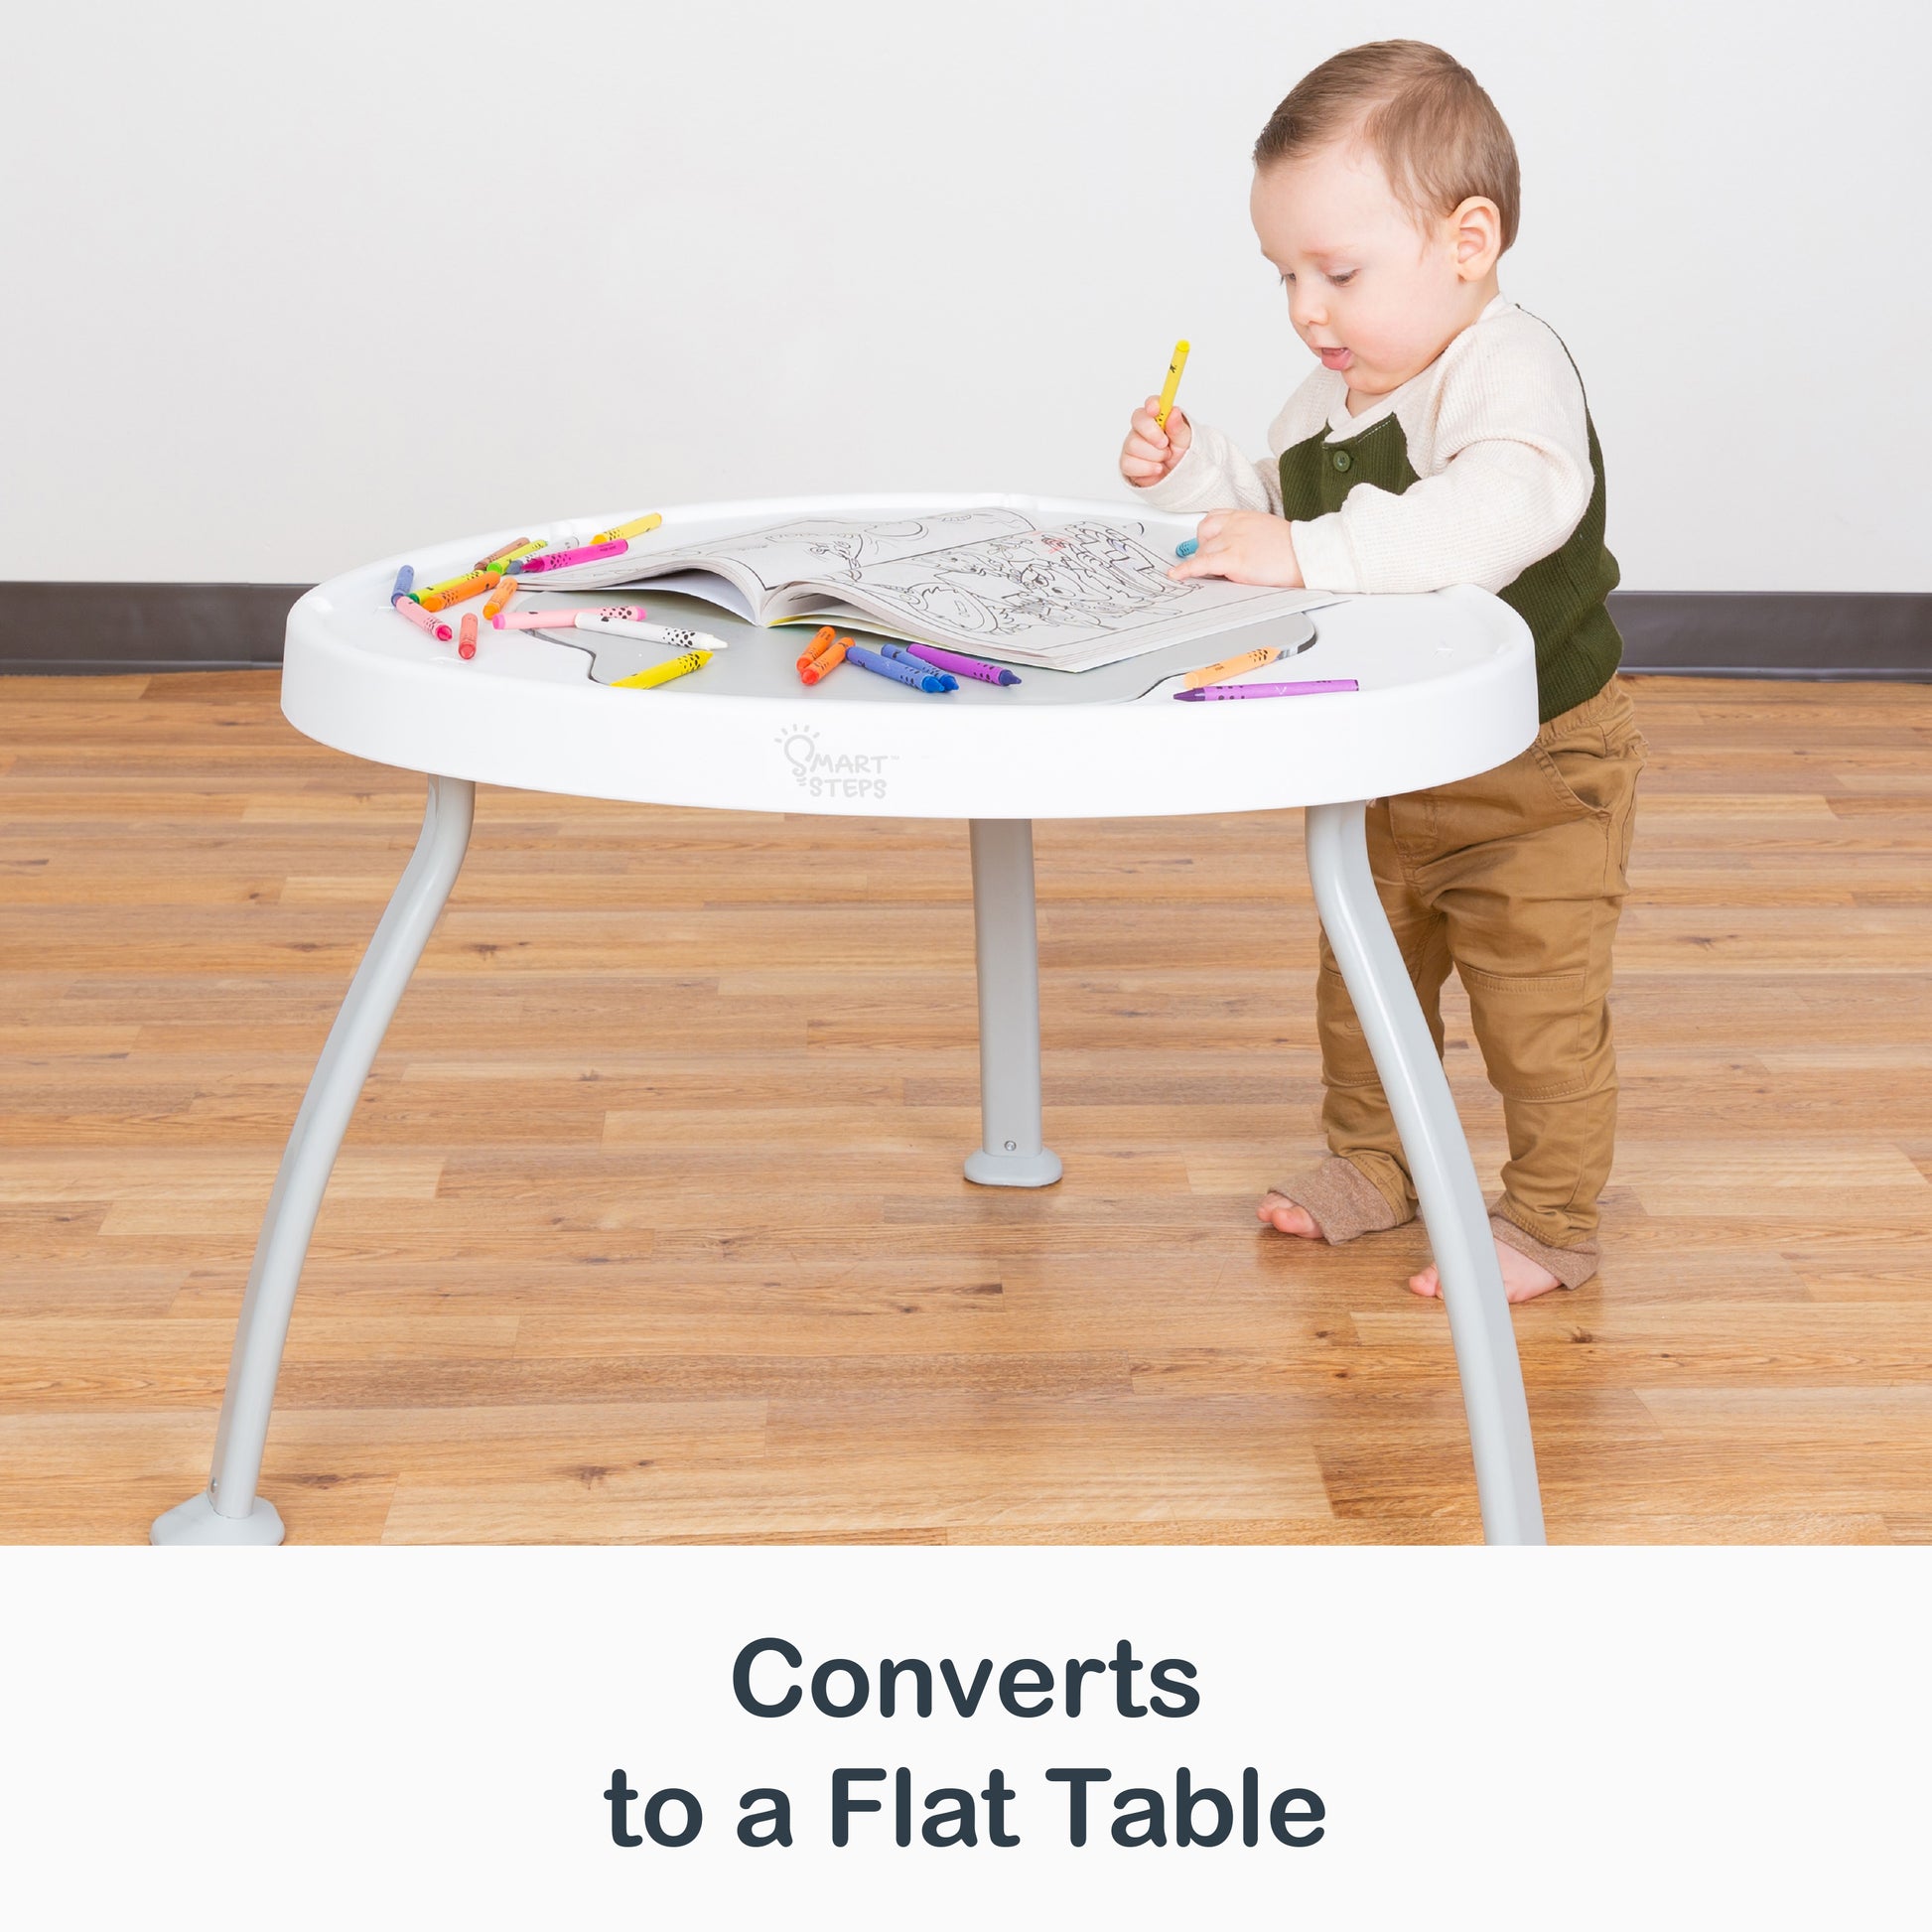 Smart Steps by Baby Trend Bounce N’ Play 3-in-1 Activity Center converts to a flat table